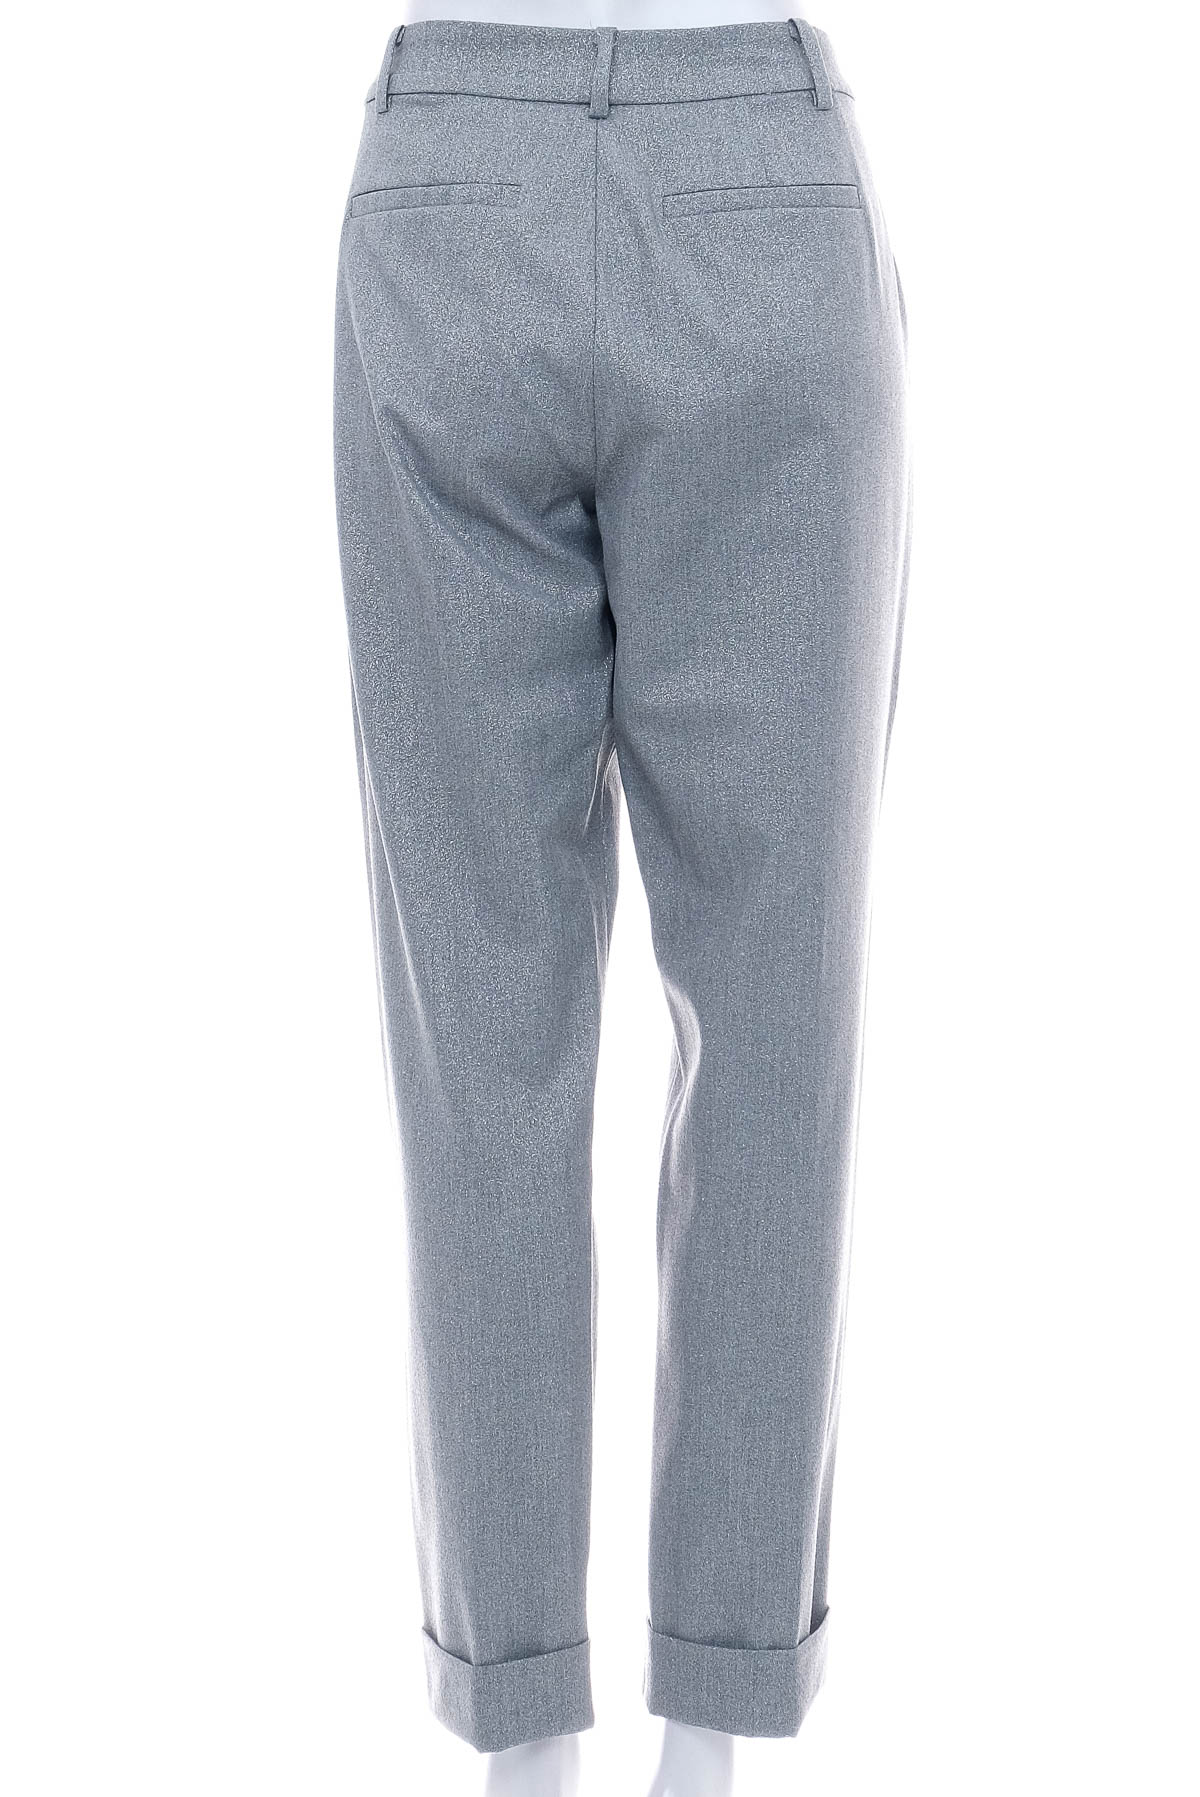 Women's trousers - River Woods - 1